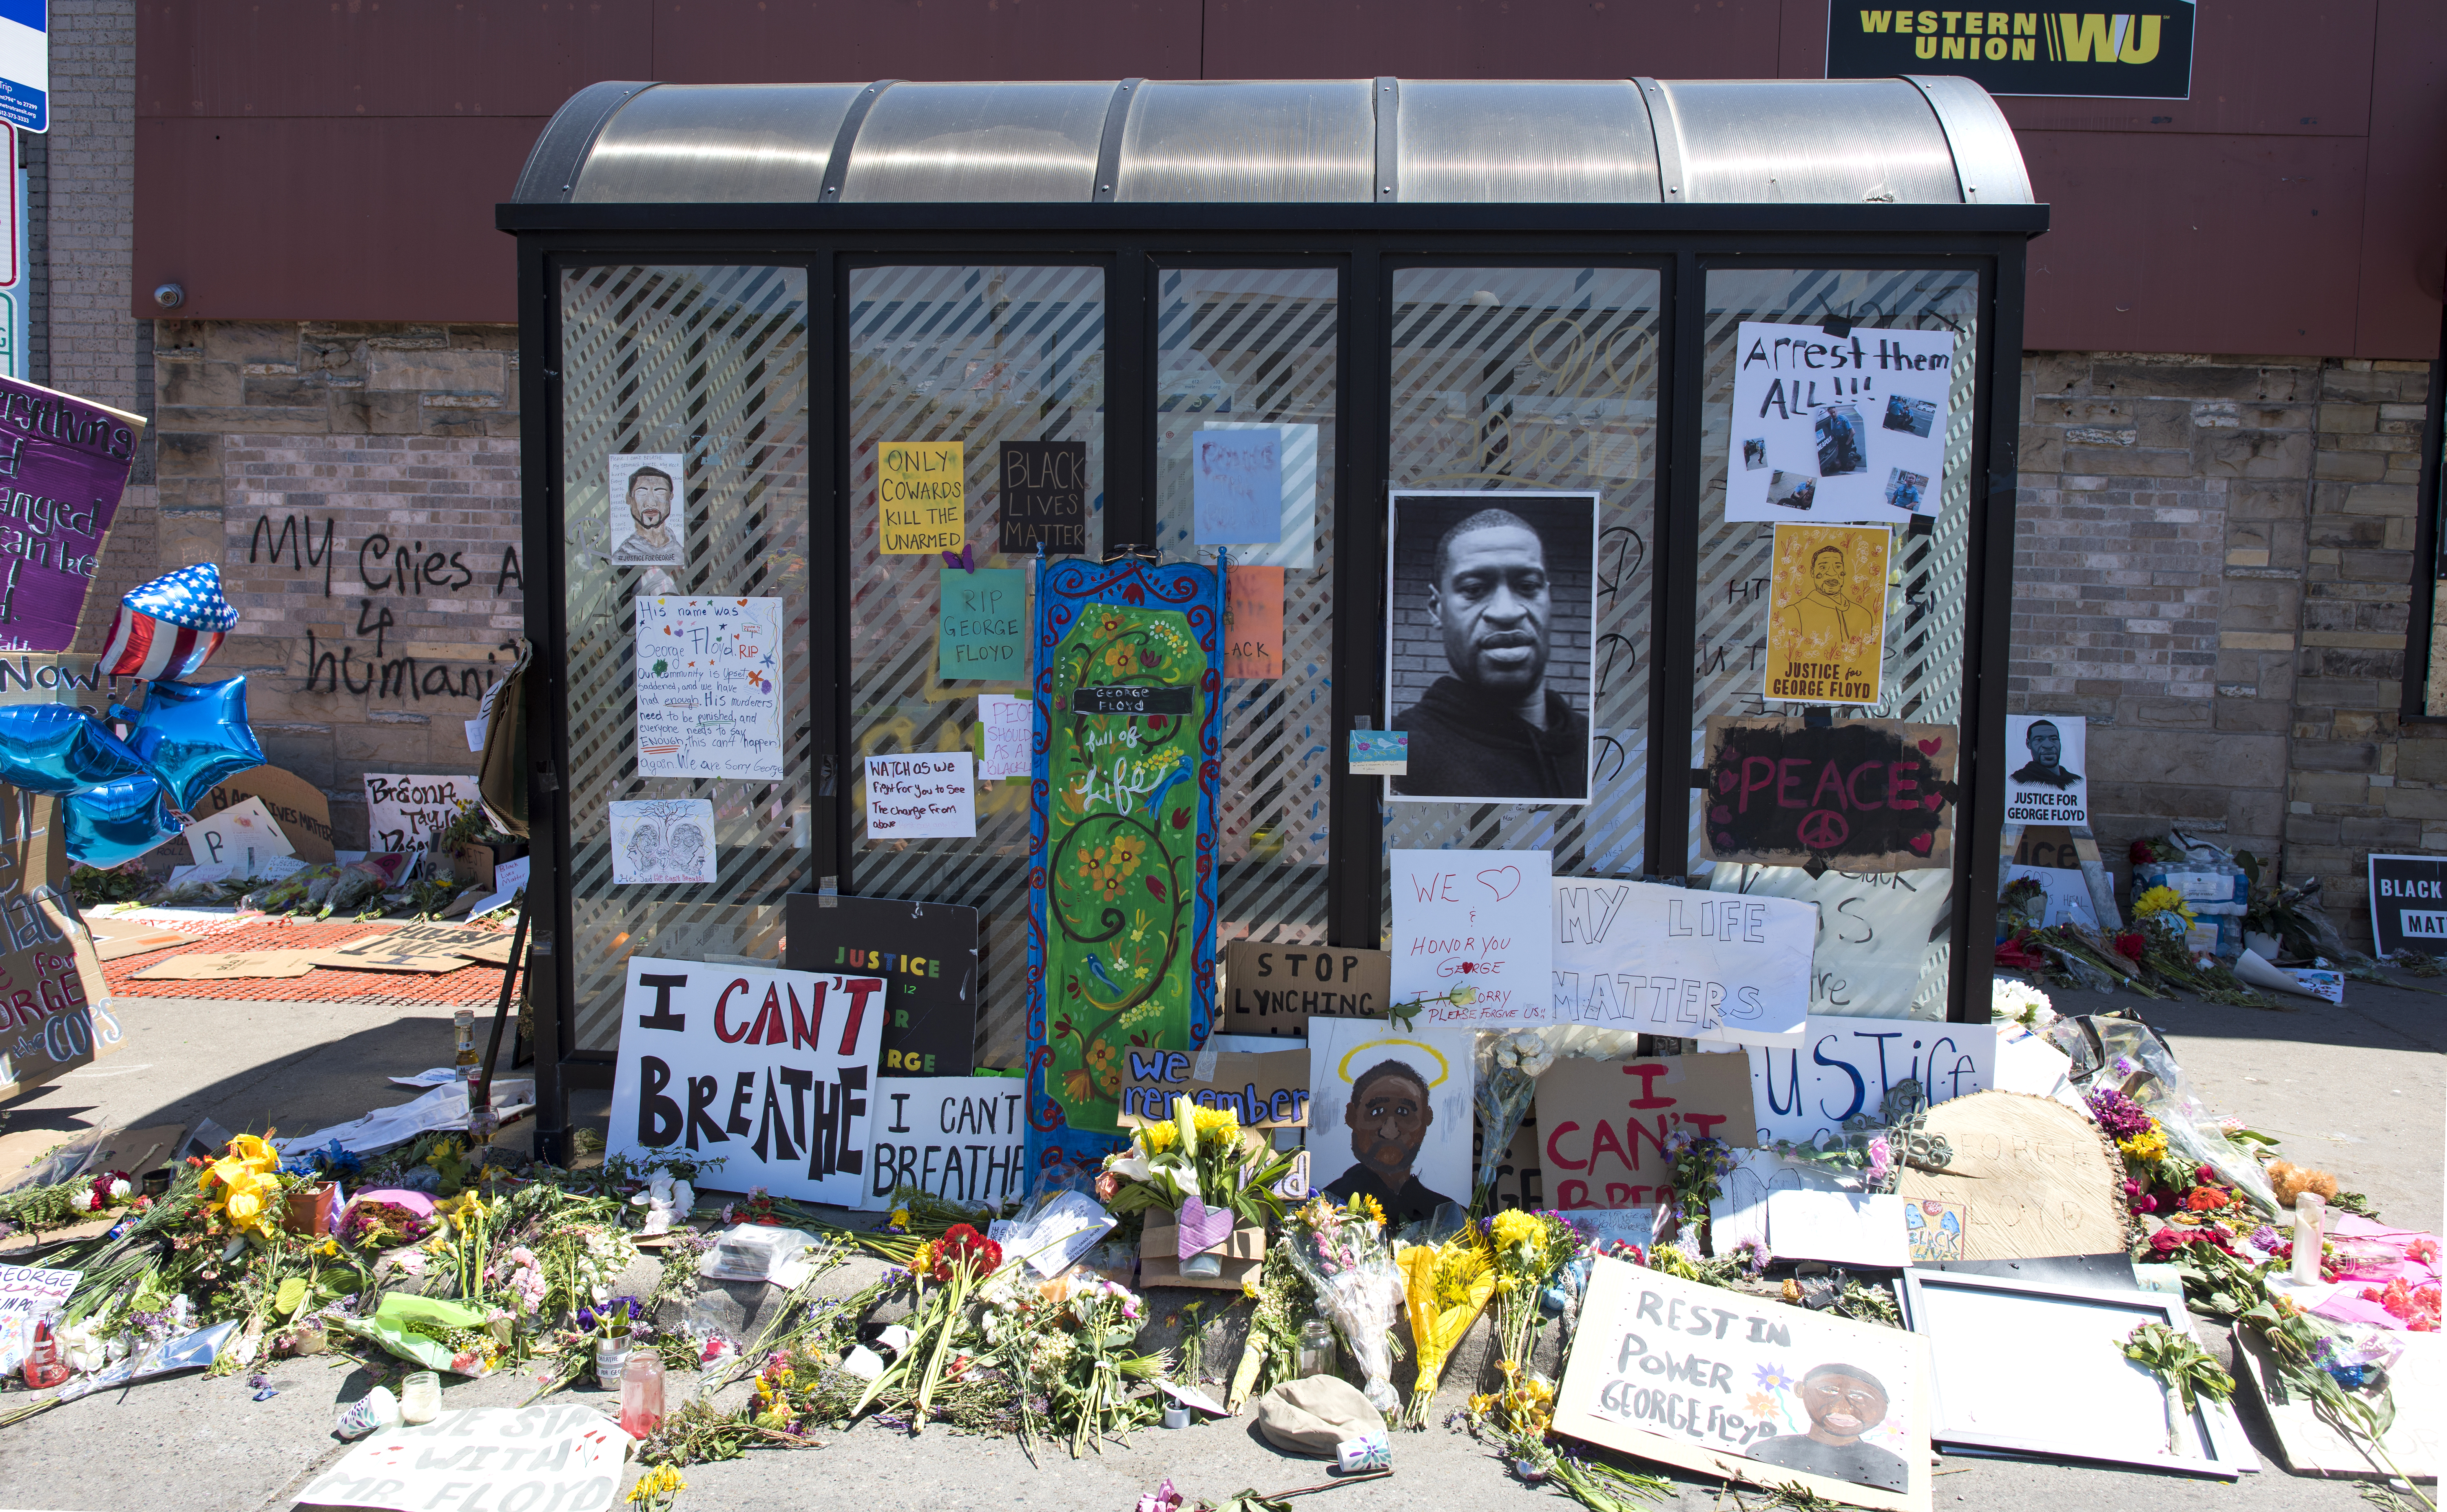 A bus stop shelter, which has been turned into an altar for George Floyd. A photo of Floyd’s face, plus various protest signs, have been taped to the sheter’s windows, and bouquets of flowers cover the sidewalk underneath.